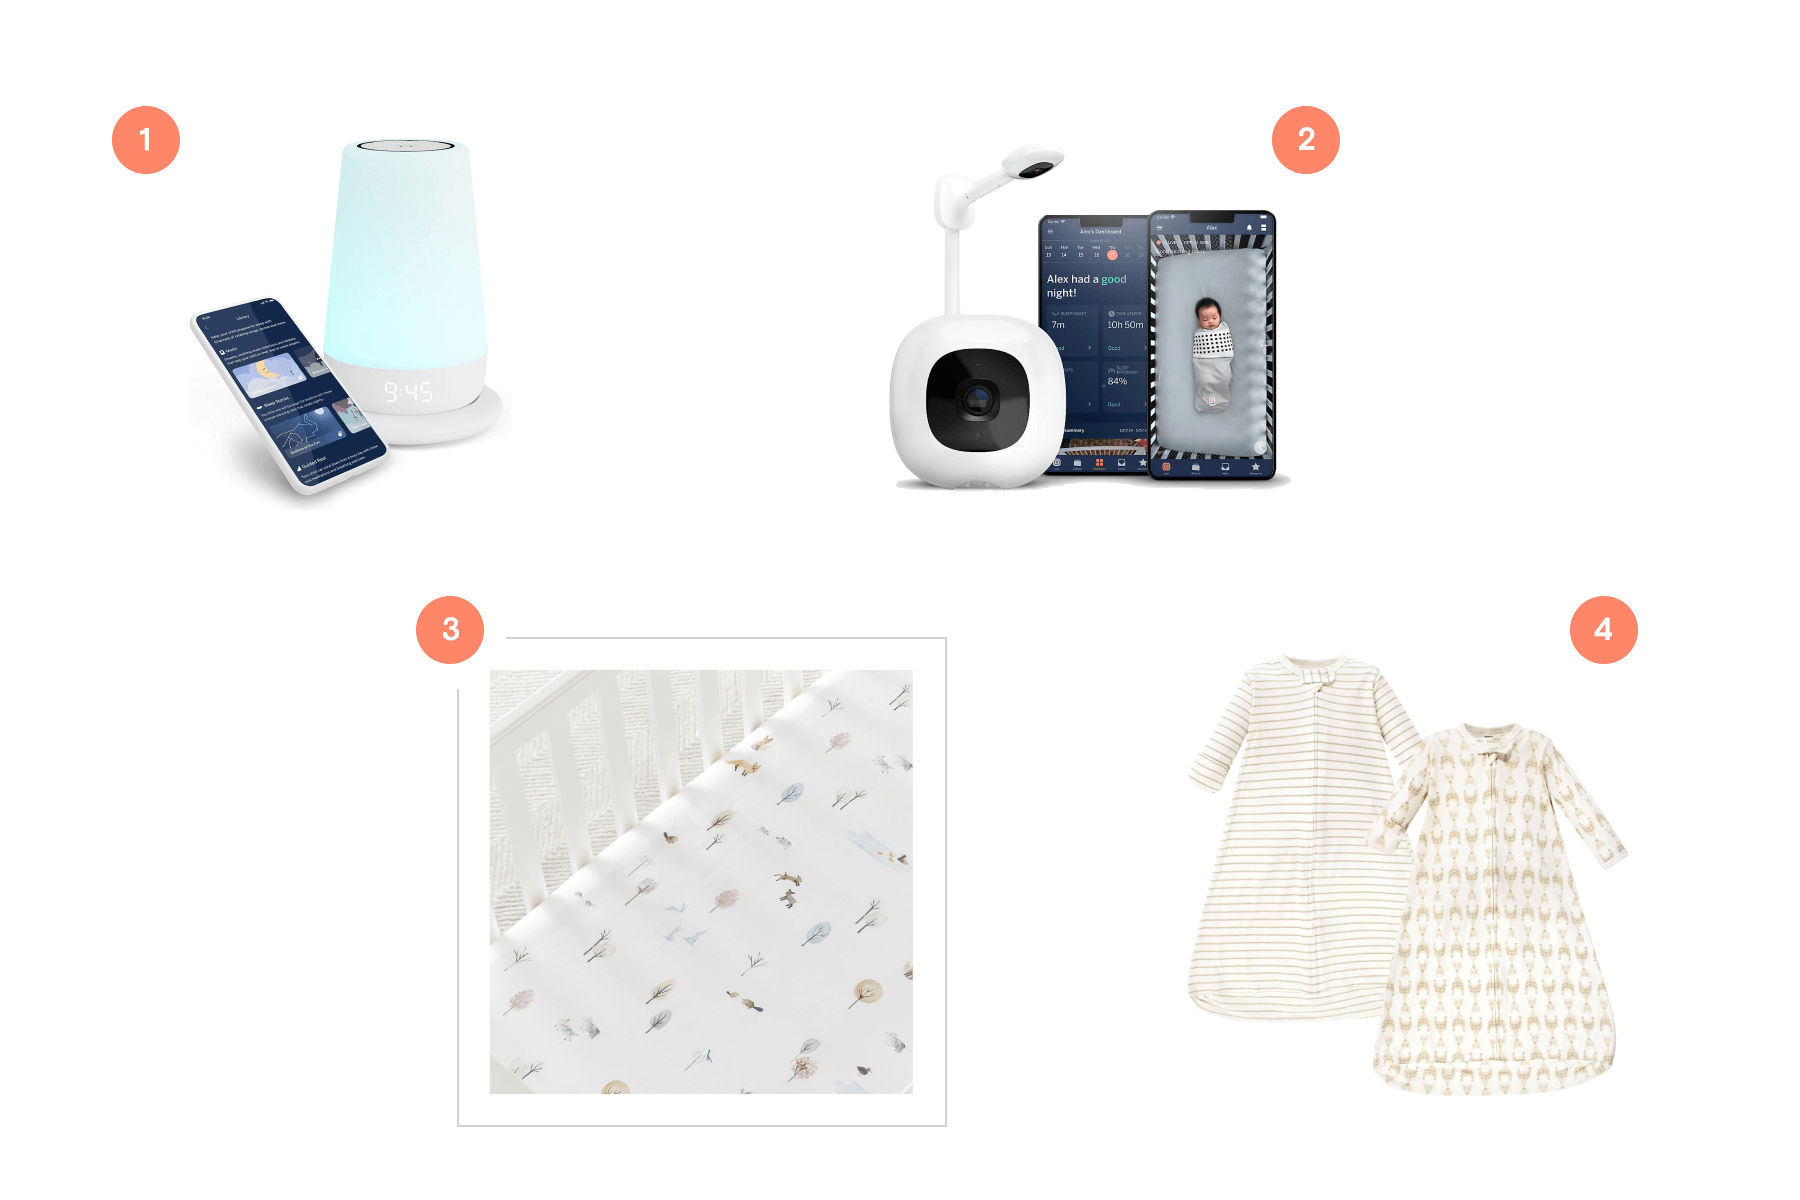 Four numbered baby items: A sound machine, a crib monitor, a crib sheet, and two sleep sacks.